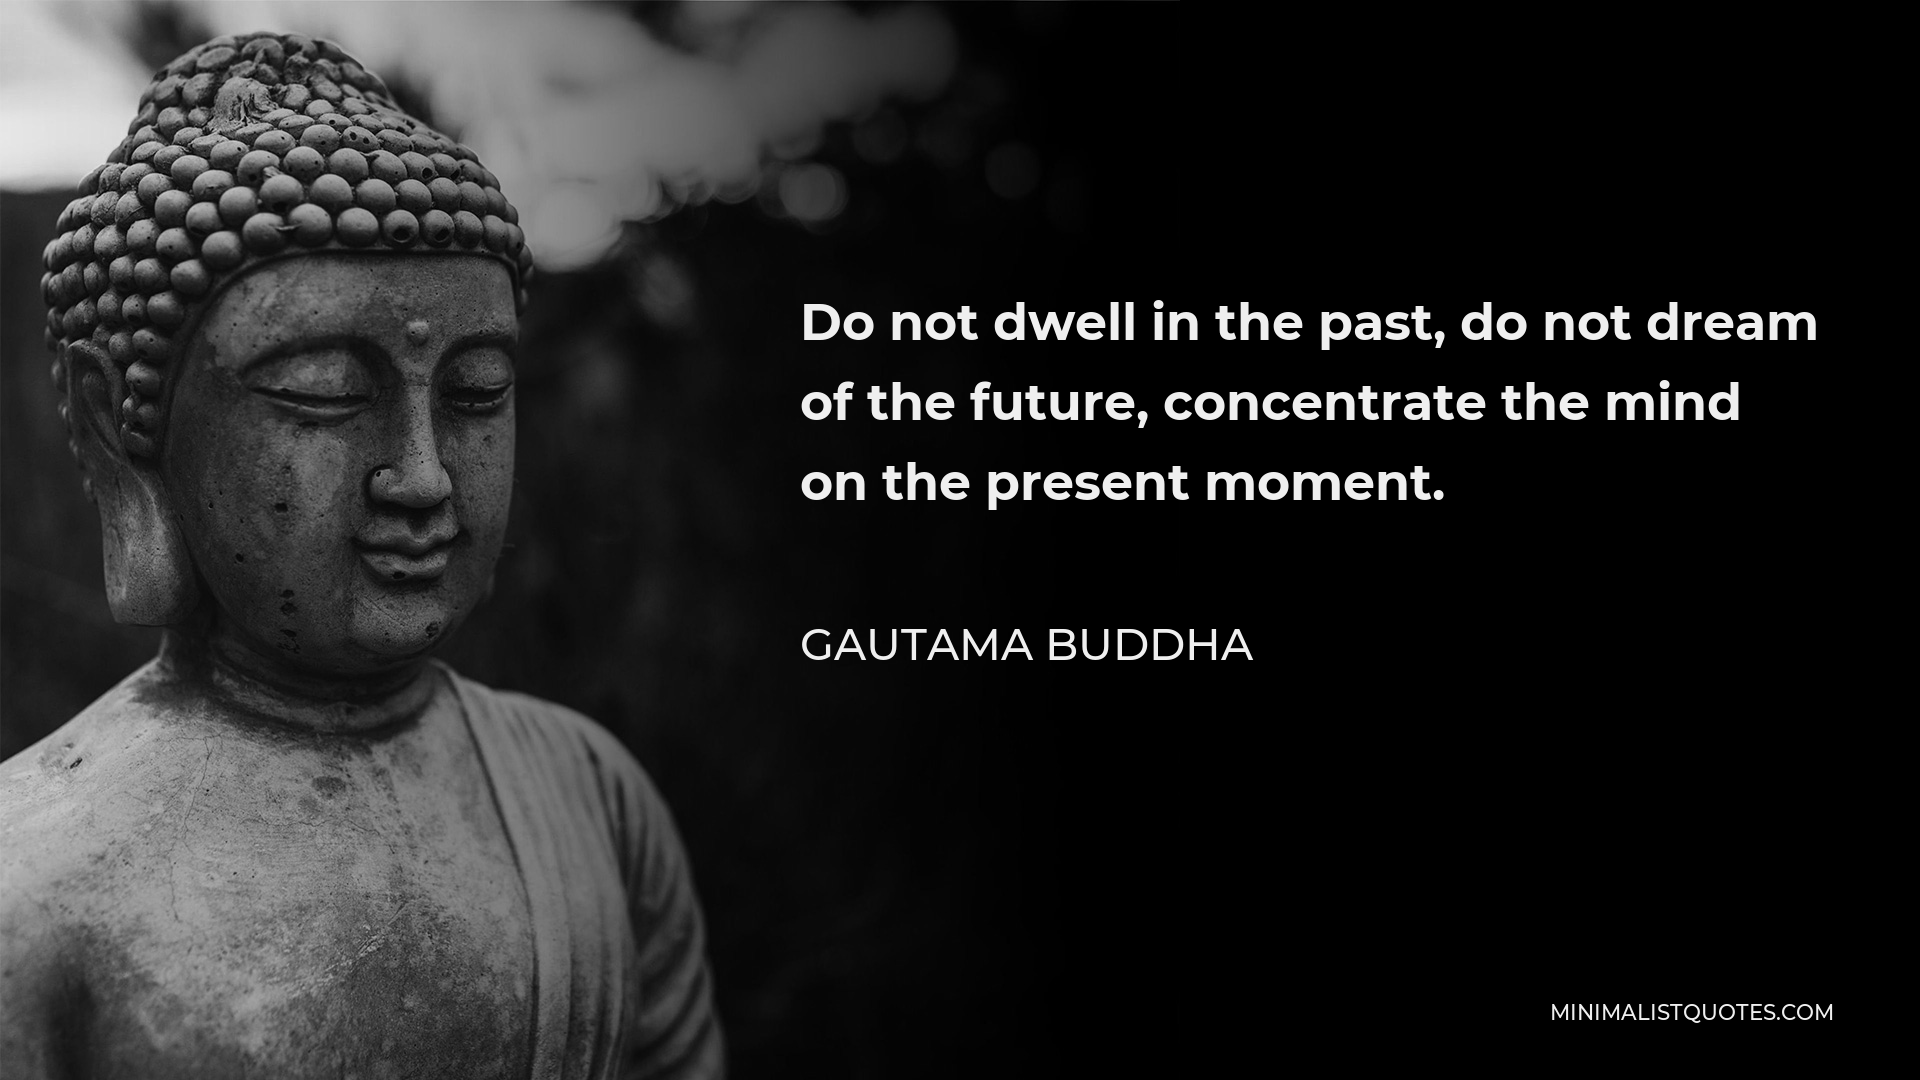 Gautama Buddha Quote: Do not dwell in the past, do not dream of the ...